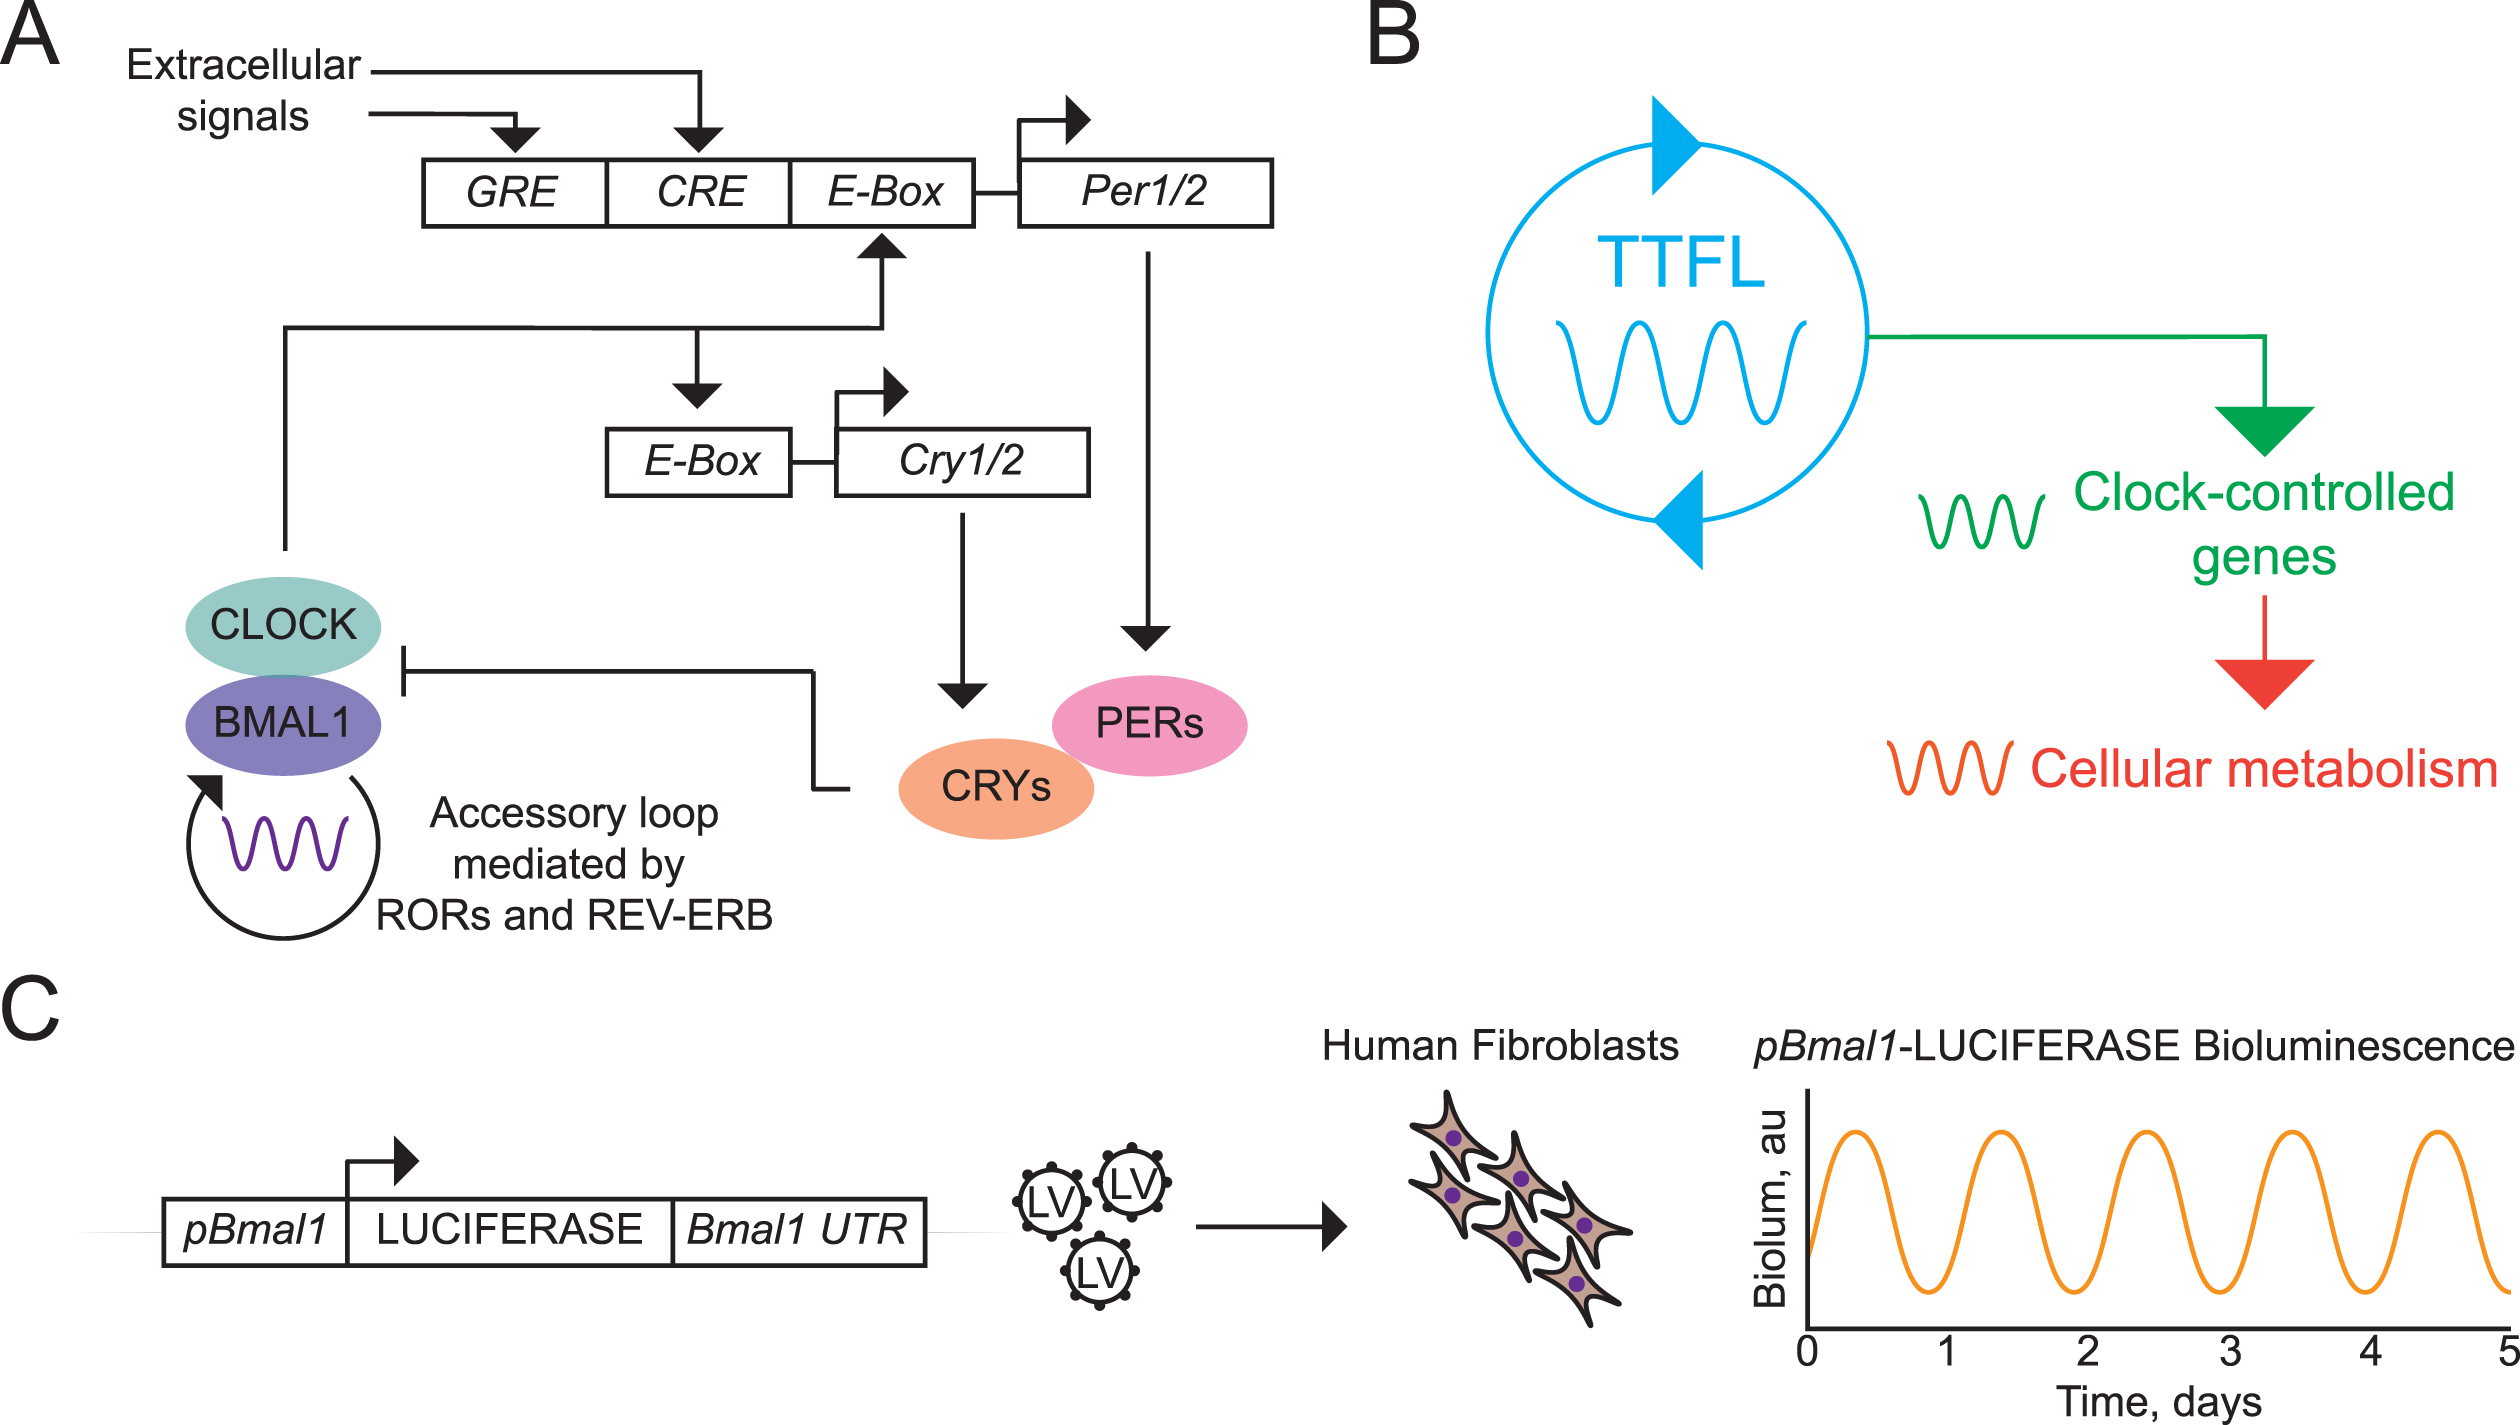 The cell-autonomous circadian clockwork. A) Schematic view of the transcriptional/ translational negative feedback loop (TTFL) incorporating positive (CLOCK:BMAL1 proteins) and negative (PER:CRY proteins) regulators that oppose their transactivation by CLOCK:BMAL1 at E-box regulatory sequences. The core loop is stabilized by an accessory loop controlling Bmal1 expression, and its phase is regulated by signaling cascades that converge on glucocorticoid (GRE) and calcium-cAMP (CRE) regulatory elements, especially in the Per genes. B) The cell-autonomous TTFL (depicted in A) controls the circadian expression of clock-controlled genes (CCGs) that in-turn orchestrate circadian cycles of cellular metabolism. C. Demonstration of spontaneous circadian TTFL function in human fibroblasts by lentiviral (LV) transduction with a luciferase reporter based on the Bmal1 promoter (left) and subsequent bioluminescent recording for several days (right). Based on [79].